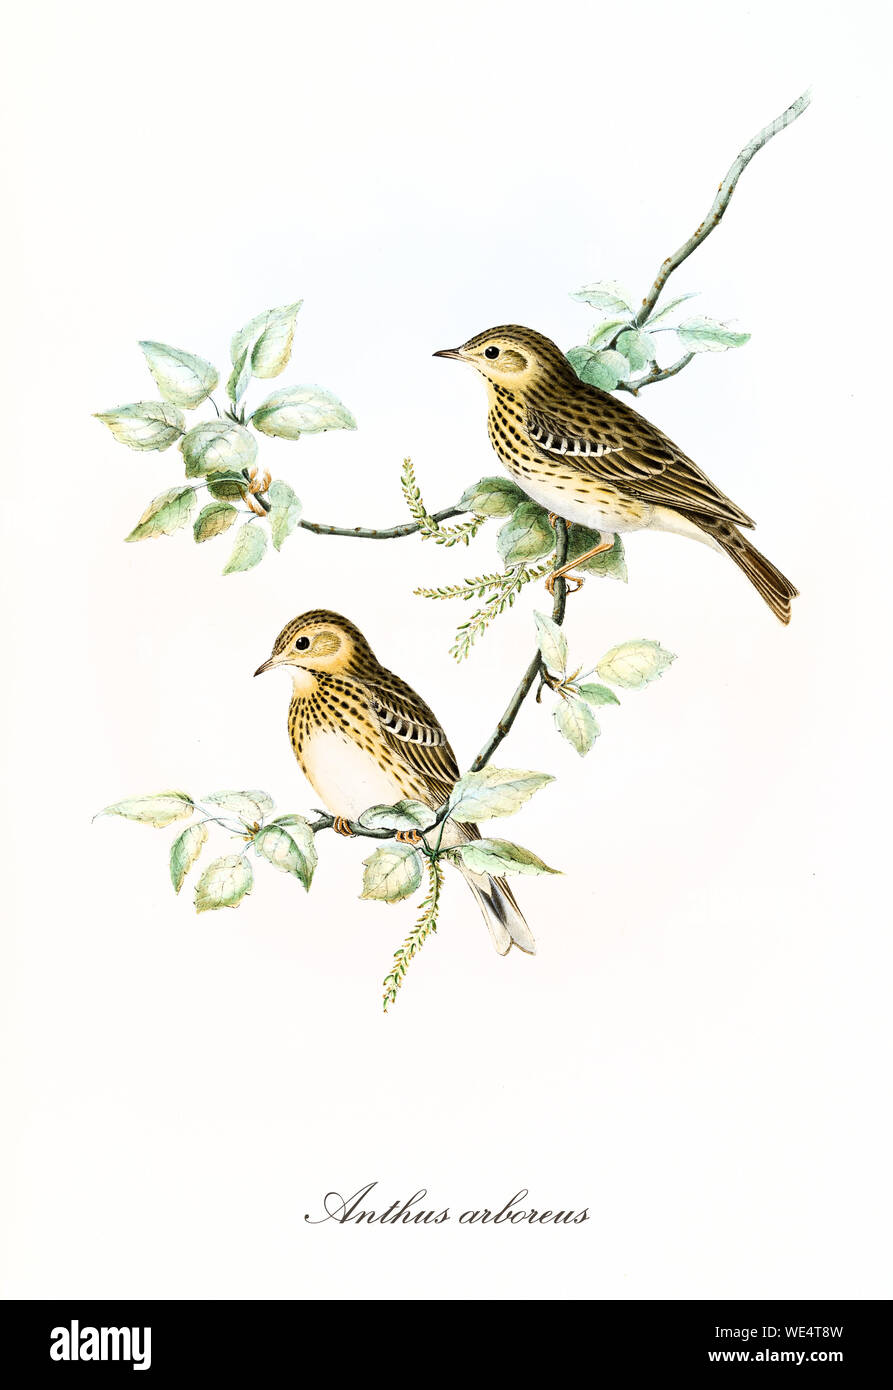 Two little cute birds getting rest on a isolated leafed thin single branch. Hand colored old illustration of Tree Pipit (Anthus trivialis). Detailed graphic by John Gould publ. In London 1862 - 1873 Stock Photo